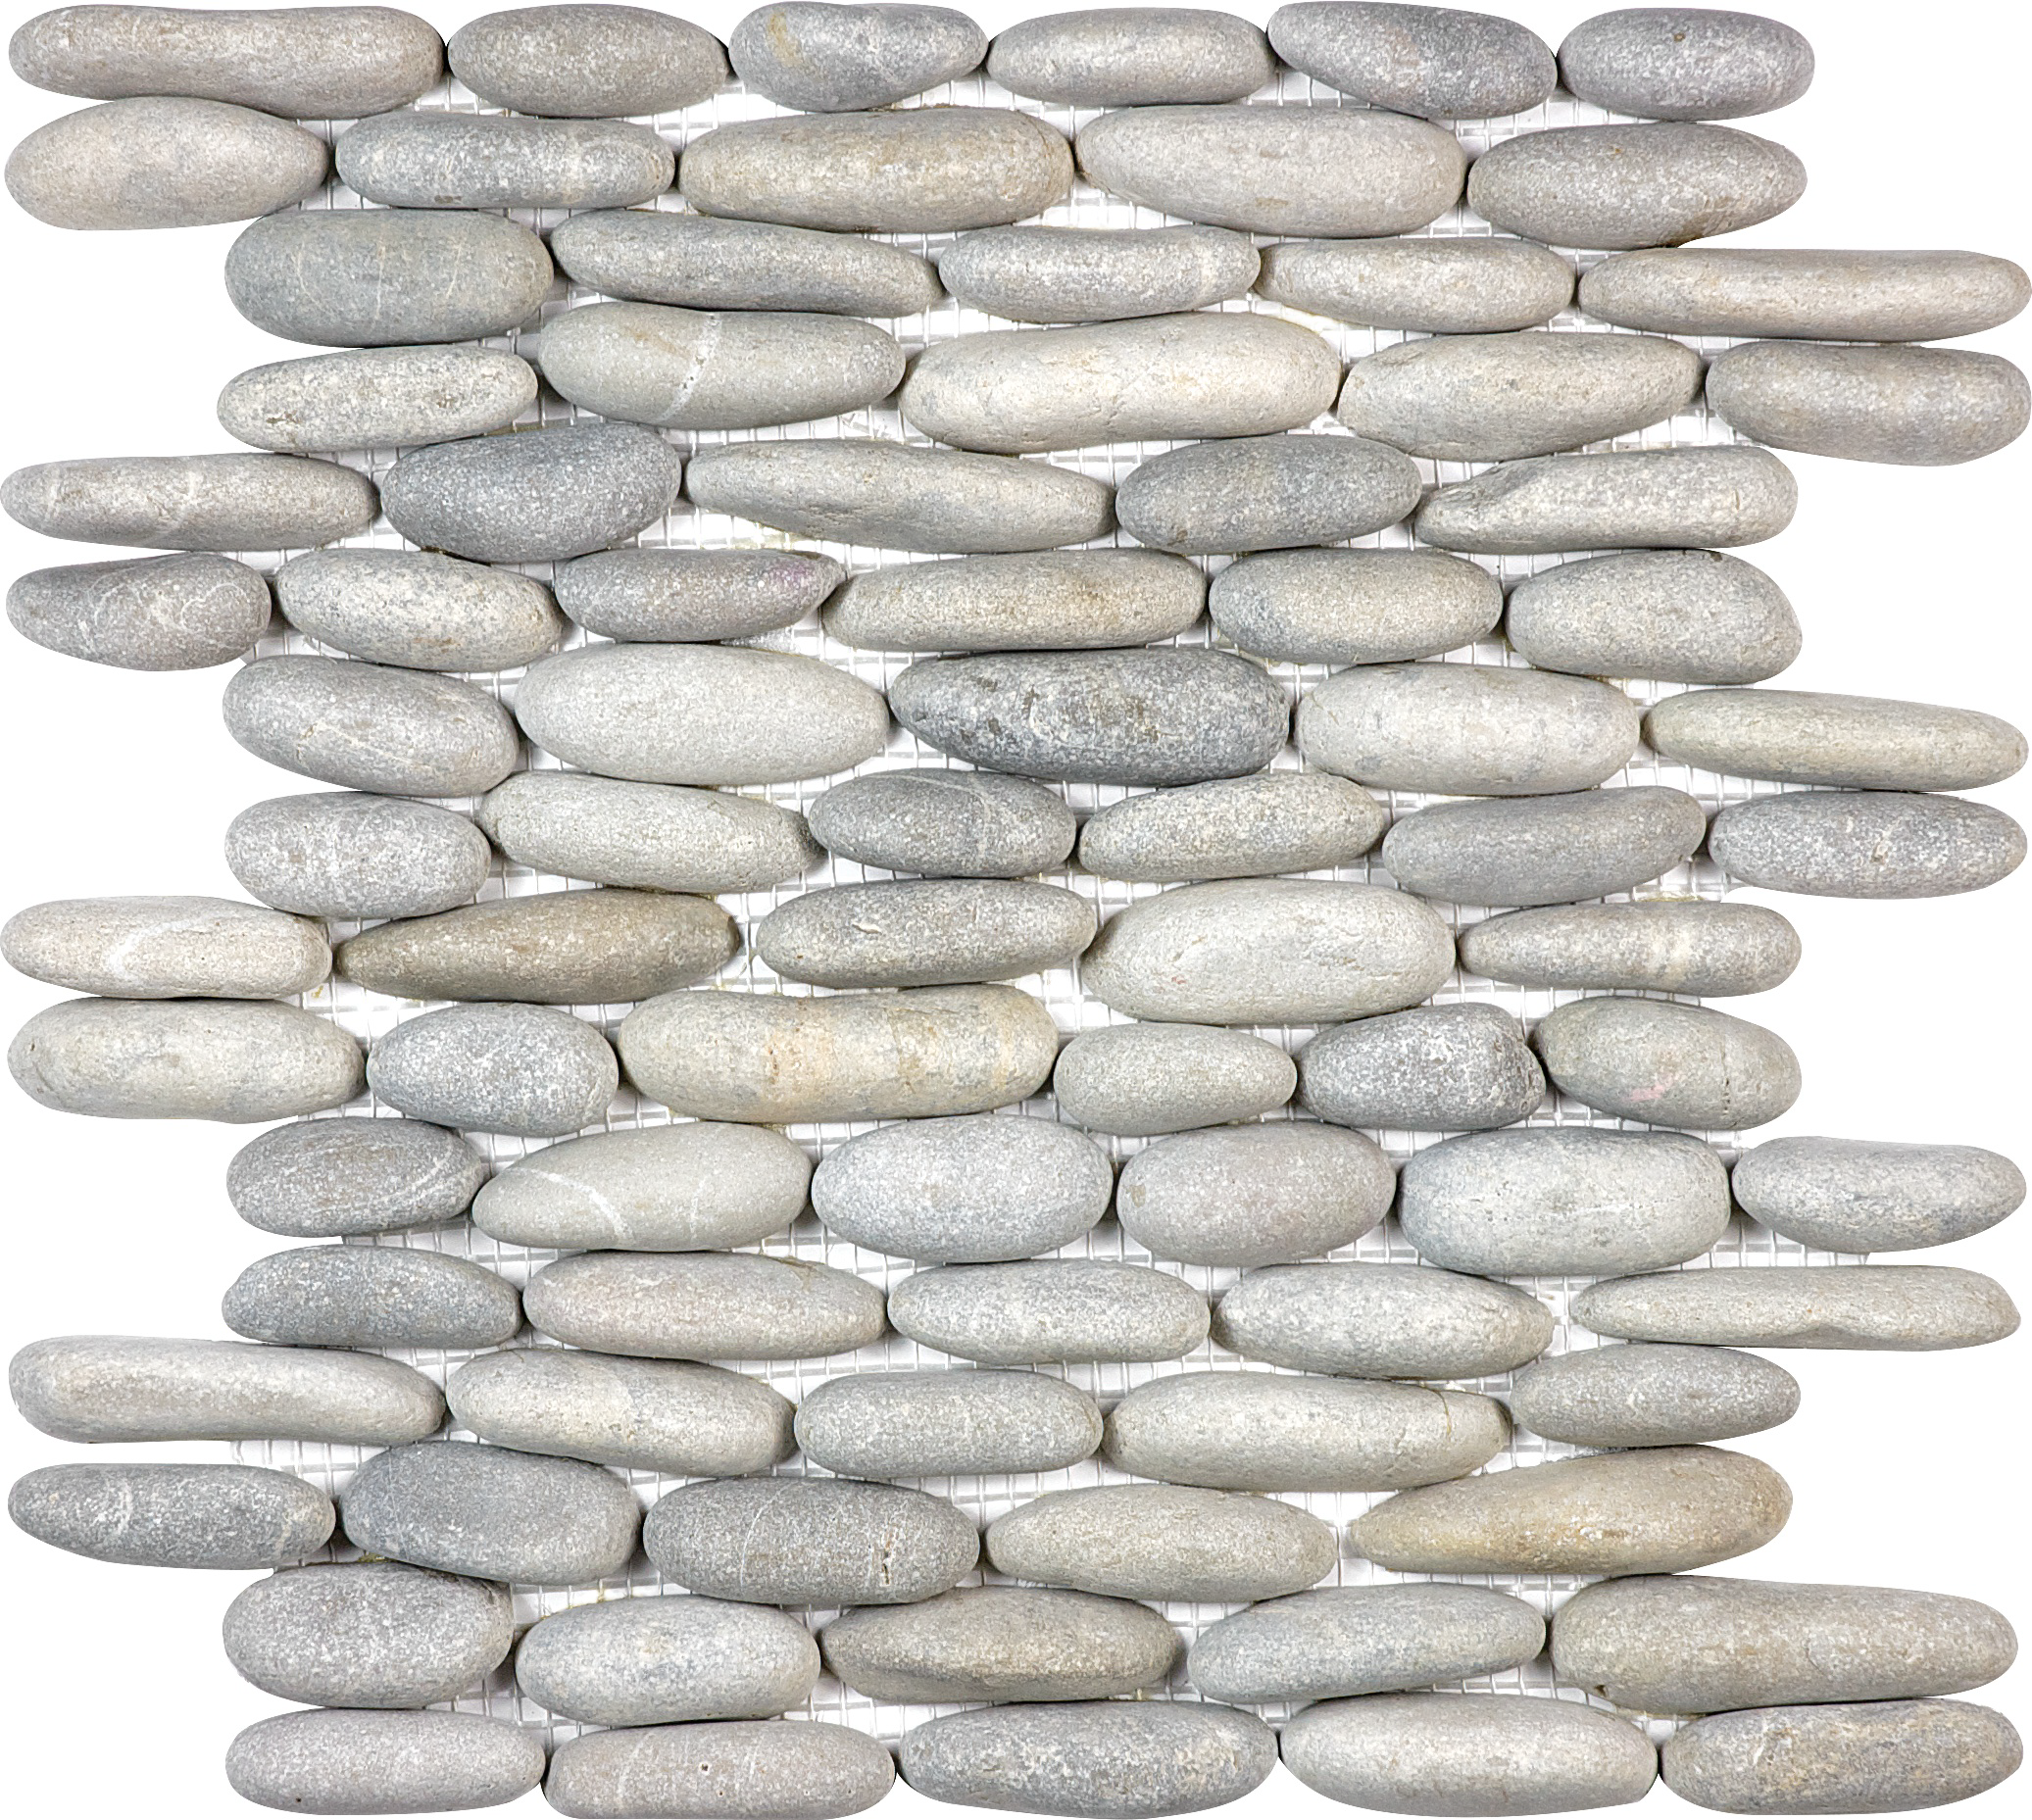 pebble vitality mica stacked pebble pattern natural stone wall mosaic from zen anatolia collection distributed by surface group international matte finish straight edge edge mesh shape